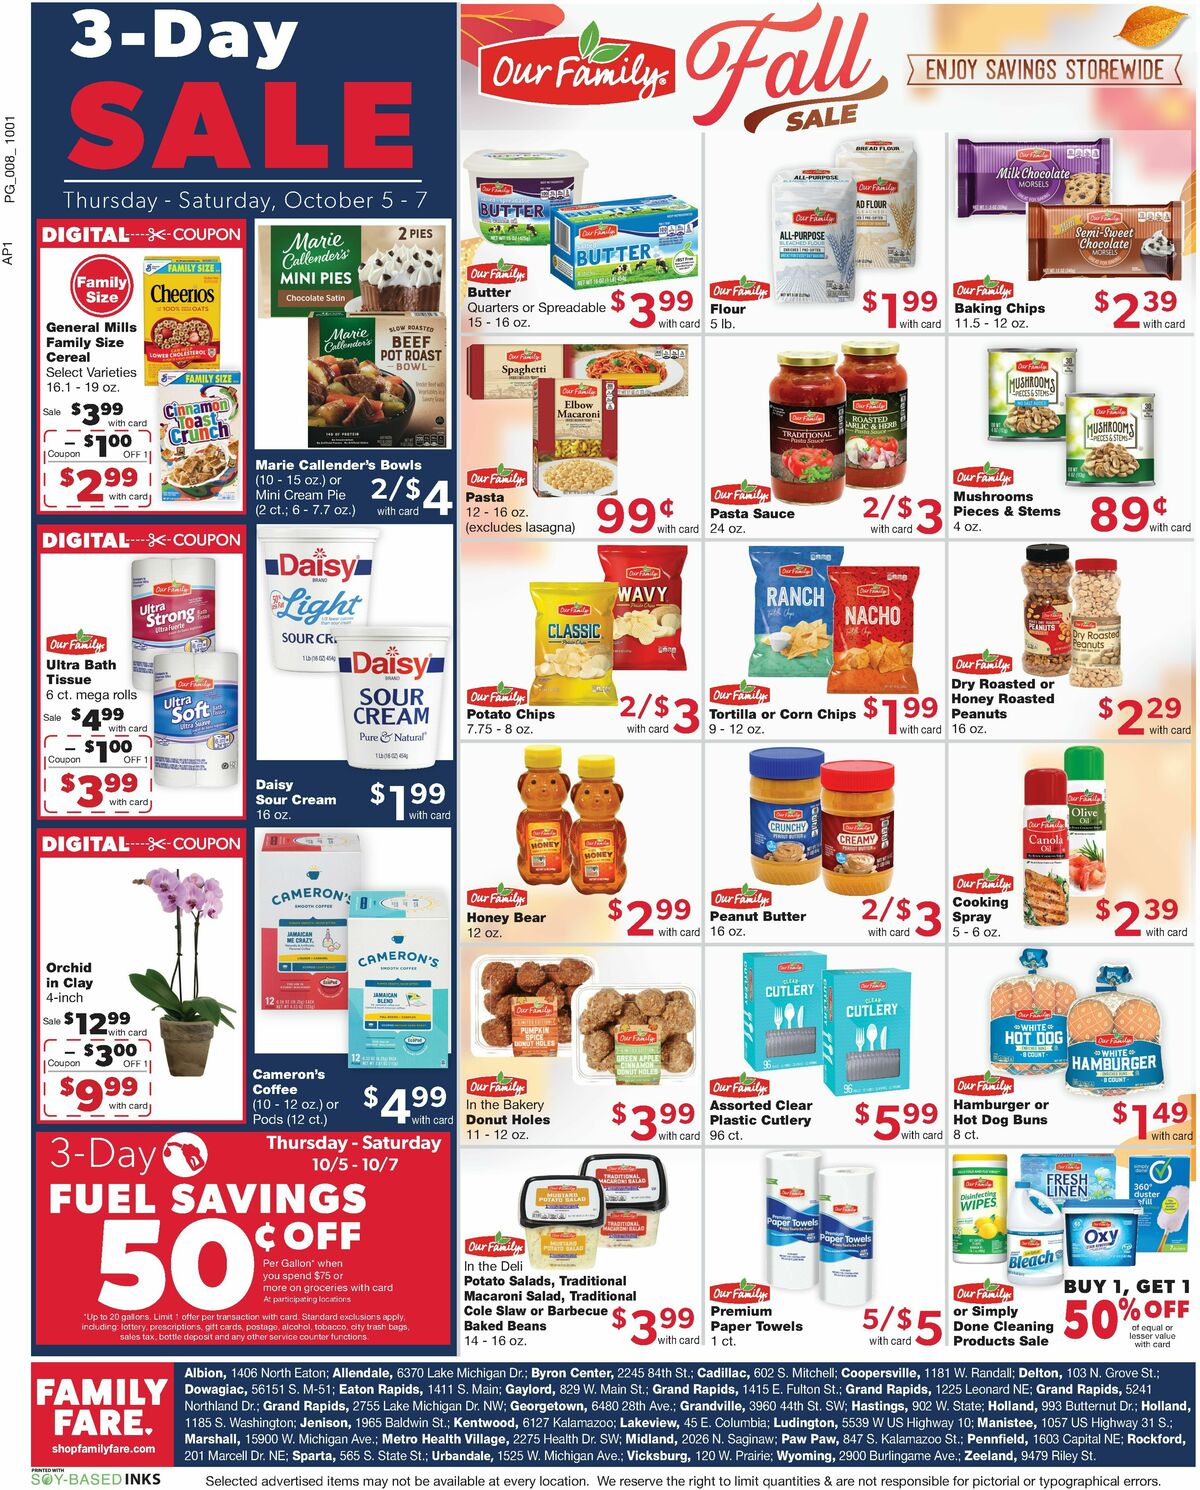 Family Fare Weekly Ad from October 1